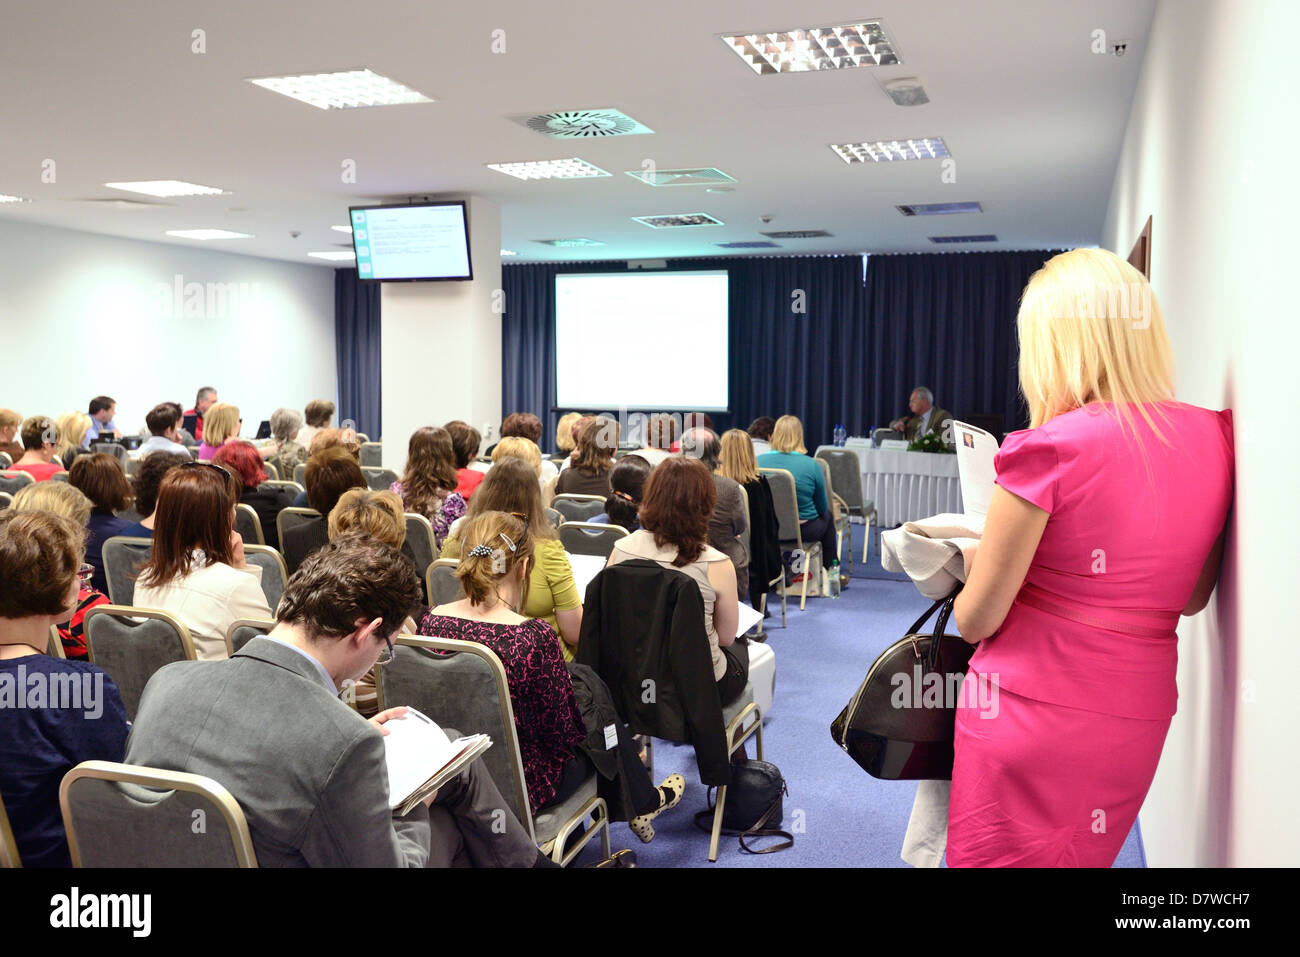 Audience listening during a professional presentation Stock Photo